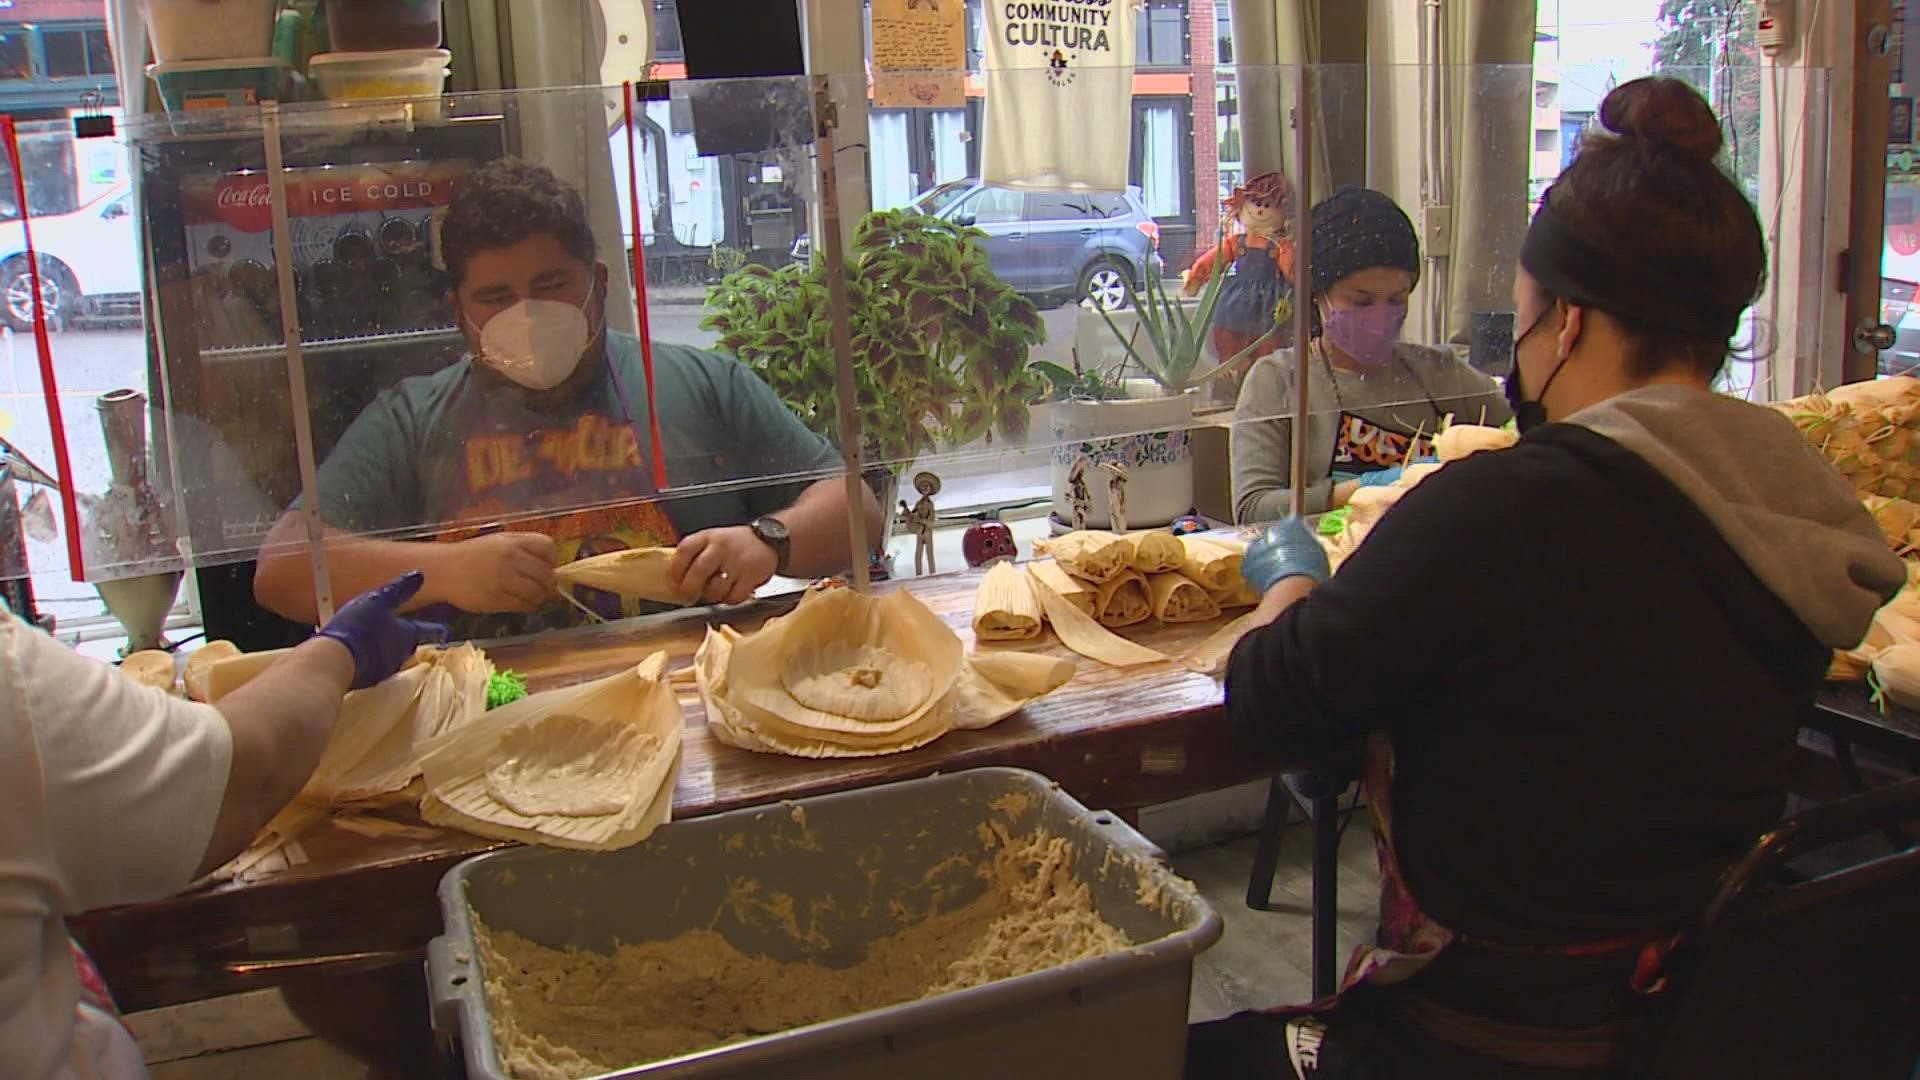 Osbaldo Hernandez and his husband started serving tamales as a side-gig in 2015. Now they own a restaurant in Seattle’s Greenlake neighborhood.